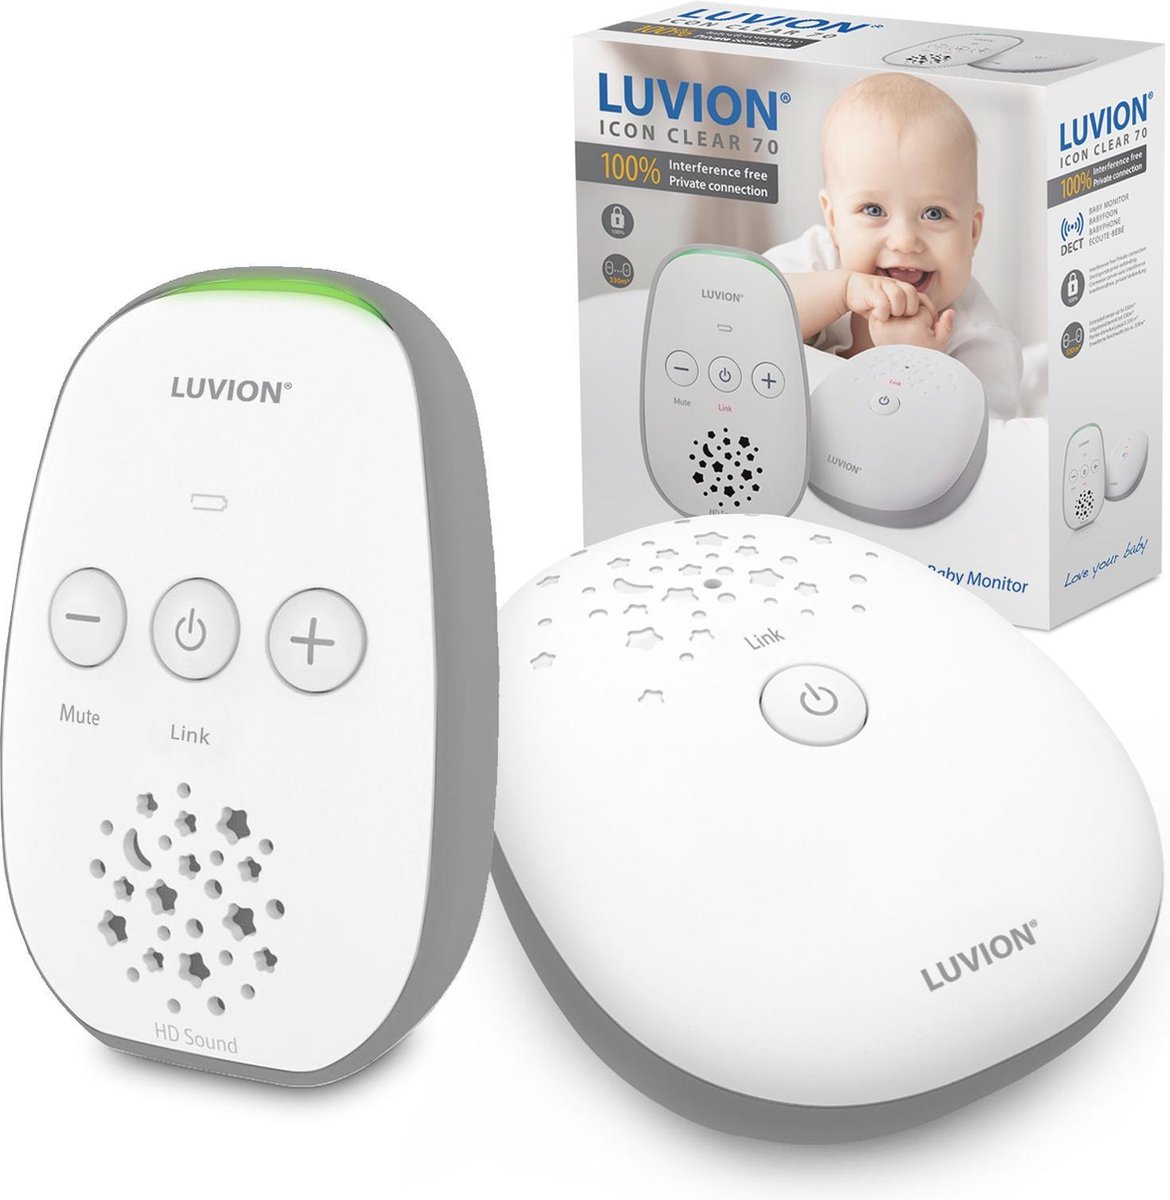 Luvion Icon Clear 70 – DECT Babyfoon